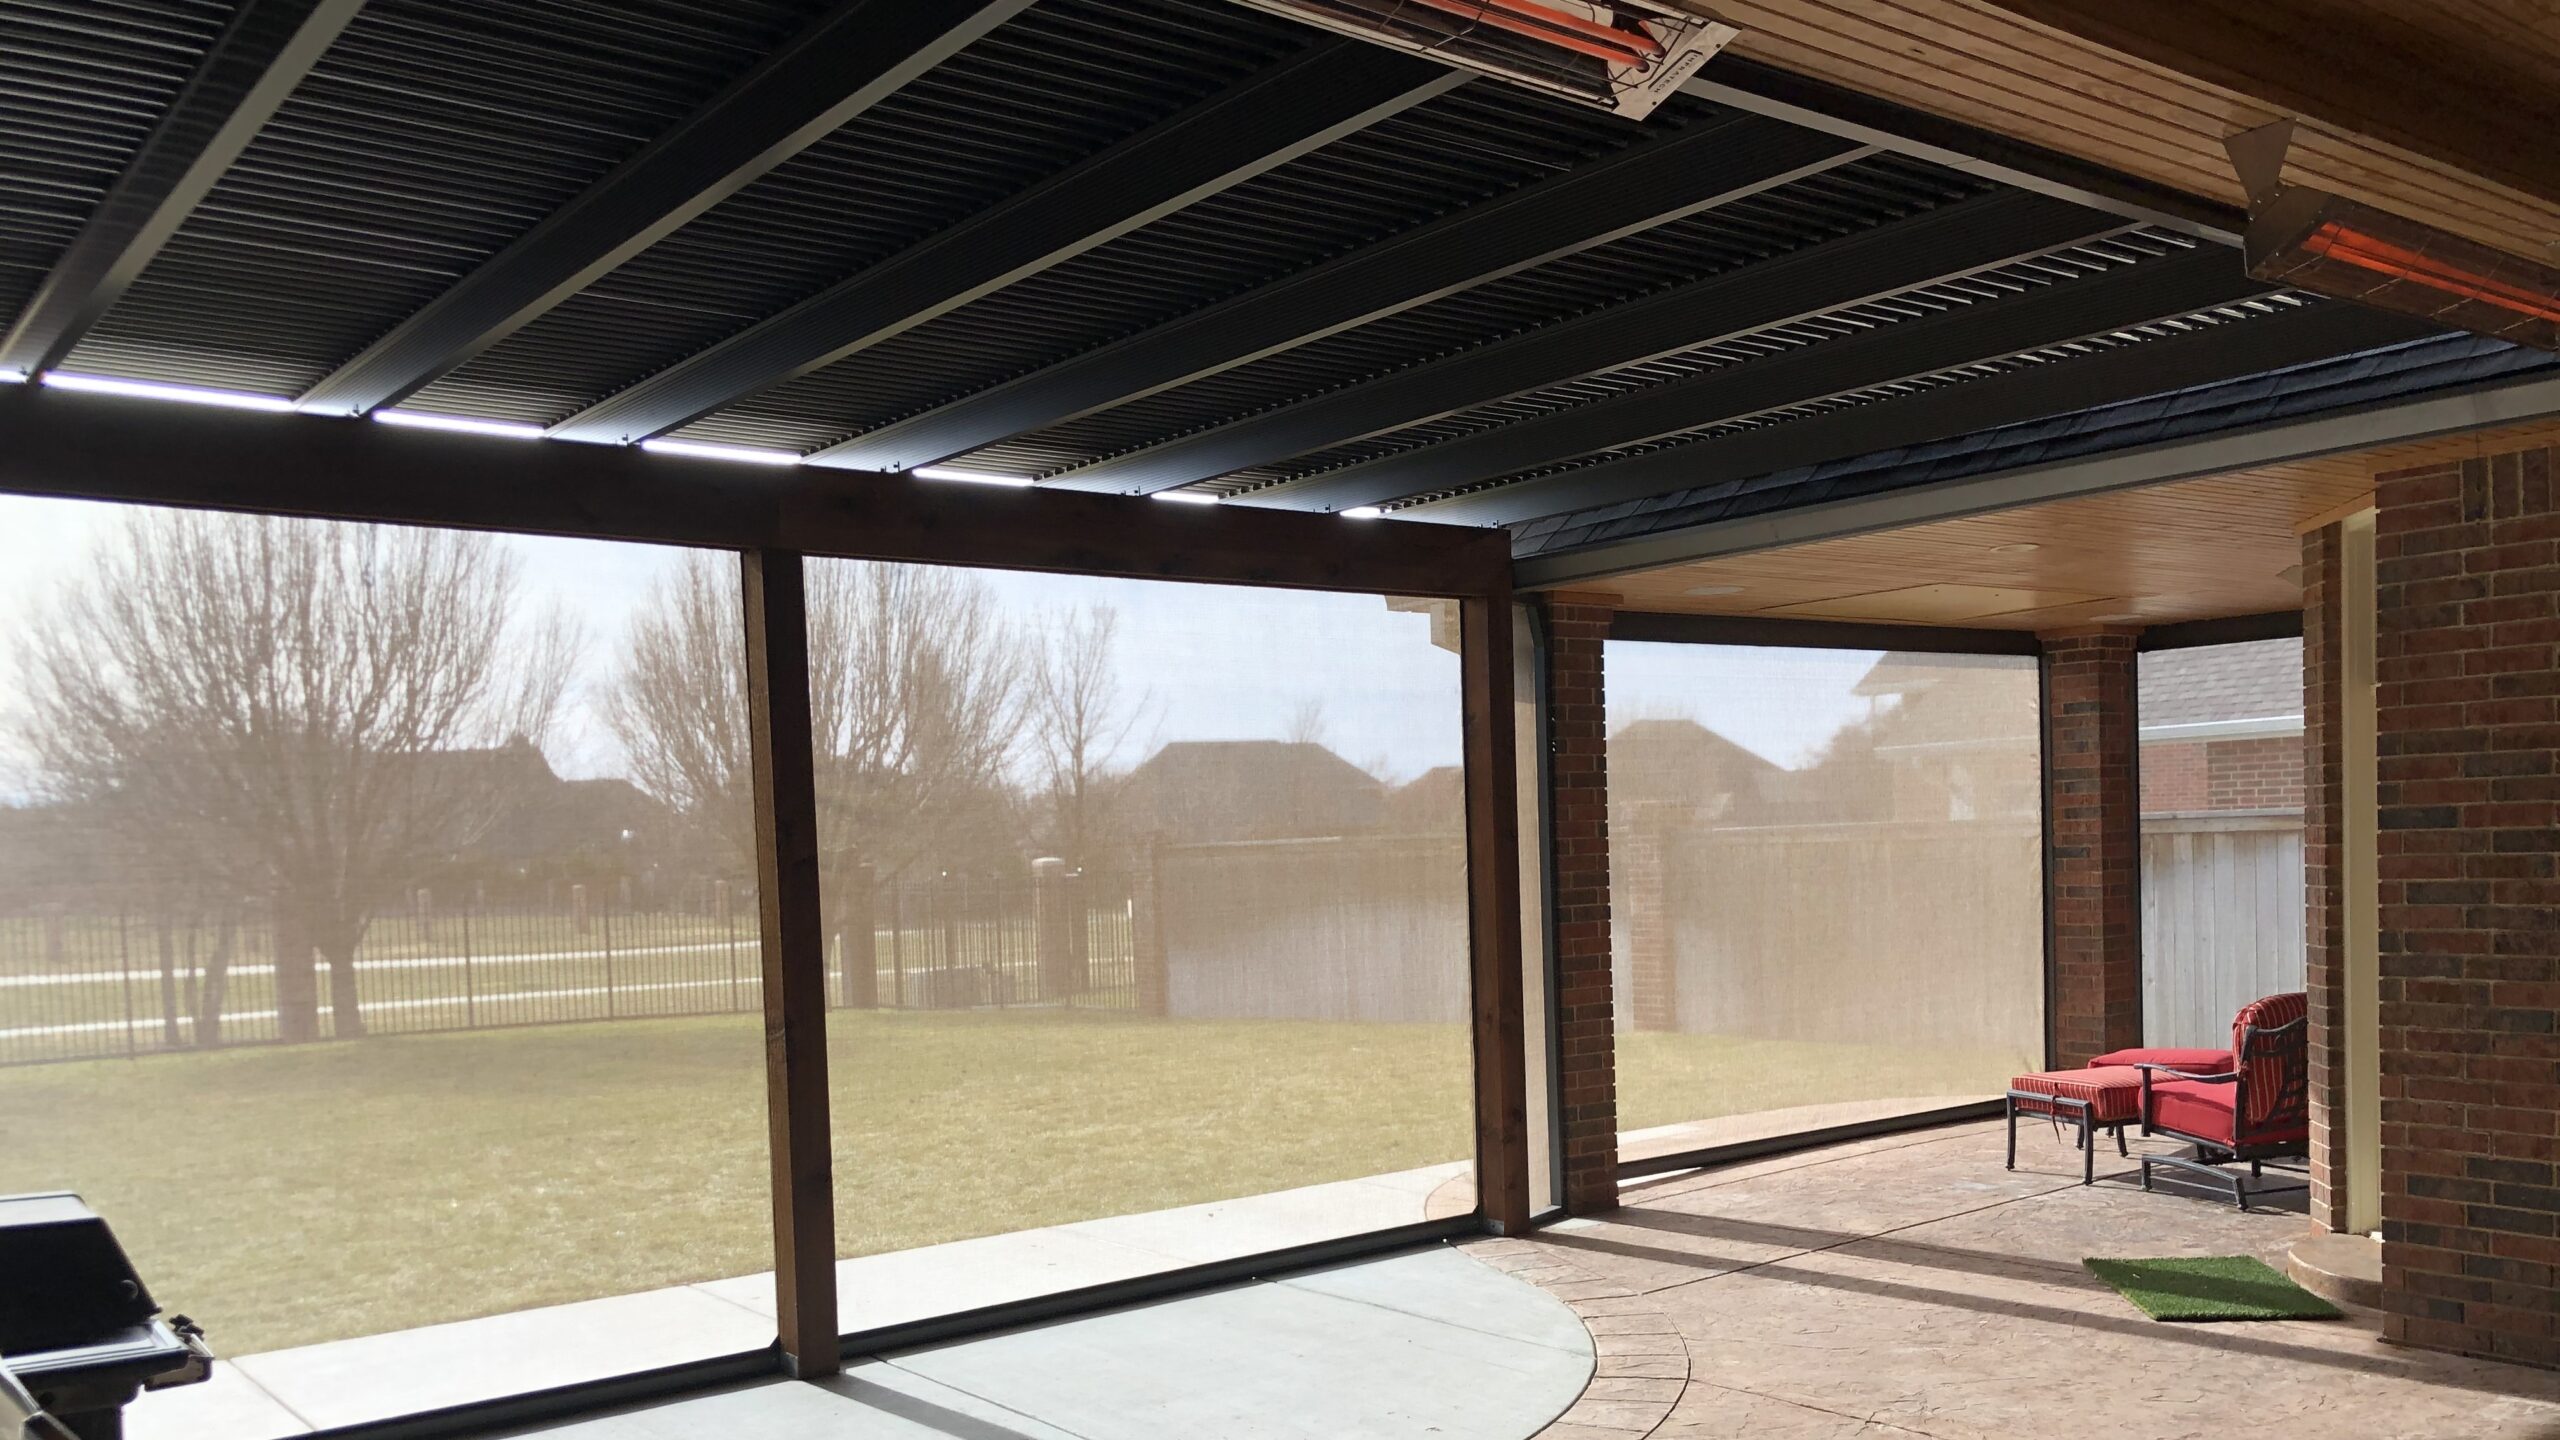 The view under a retractable awning over a patio